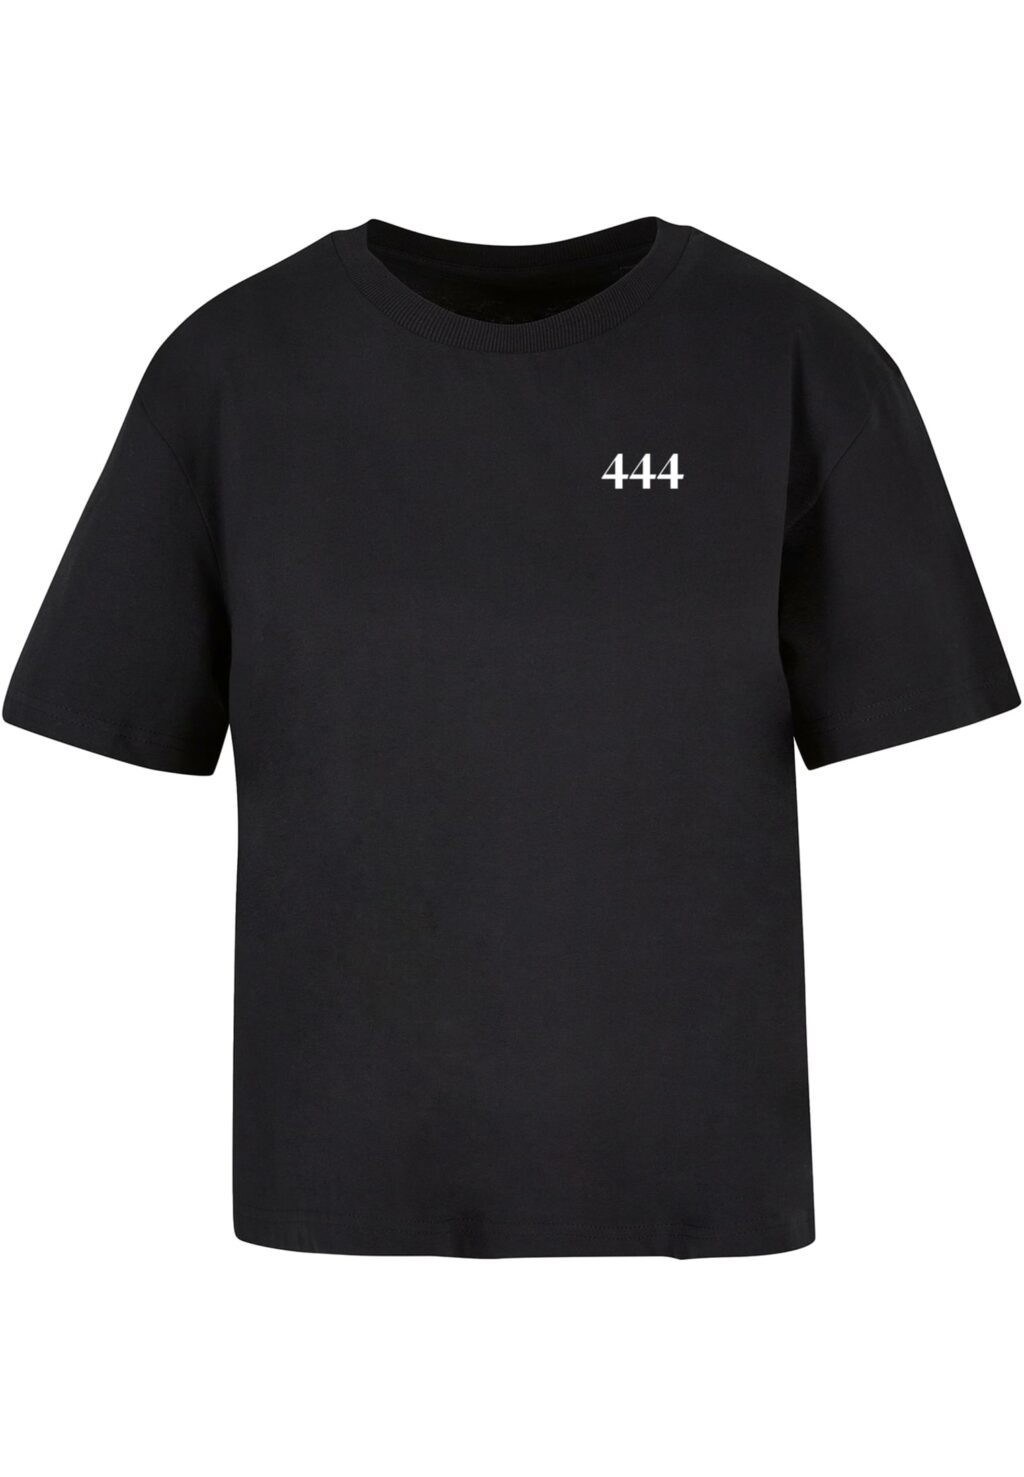 444 Protection Tee black MST075